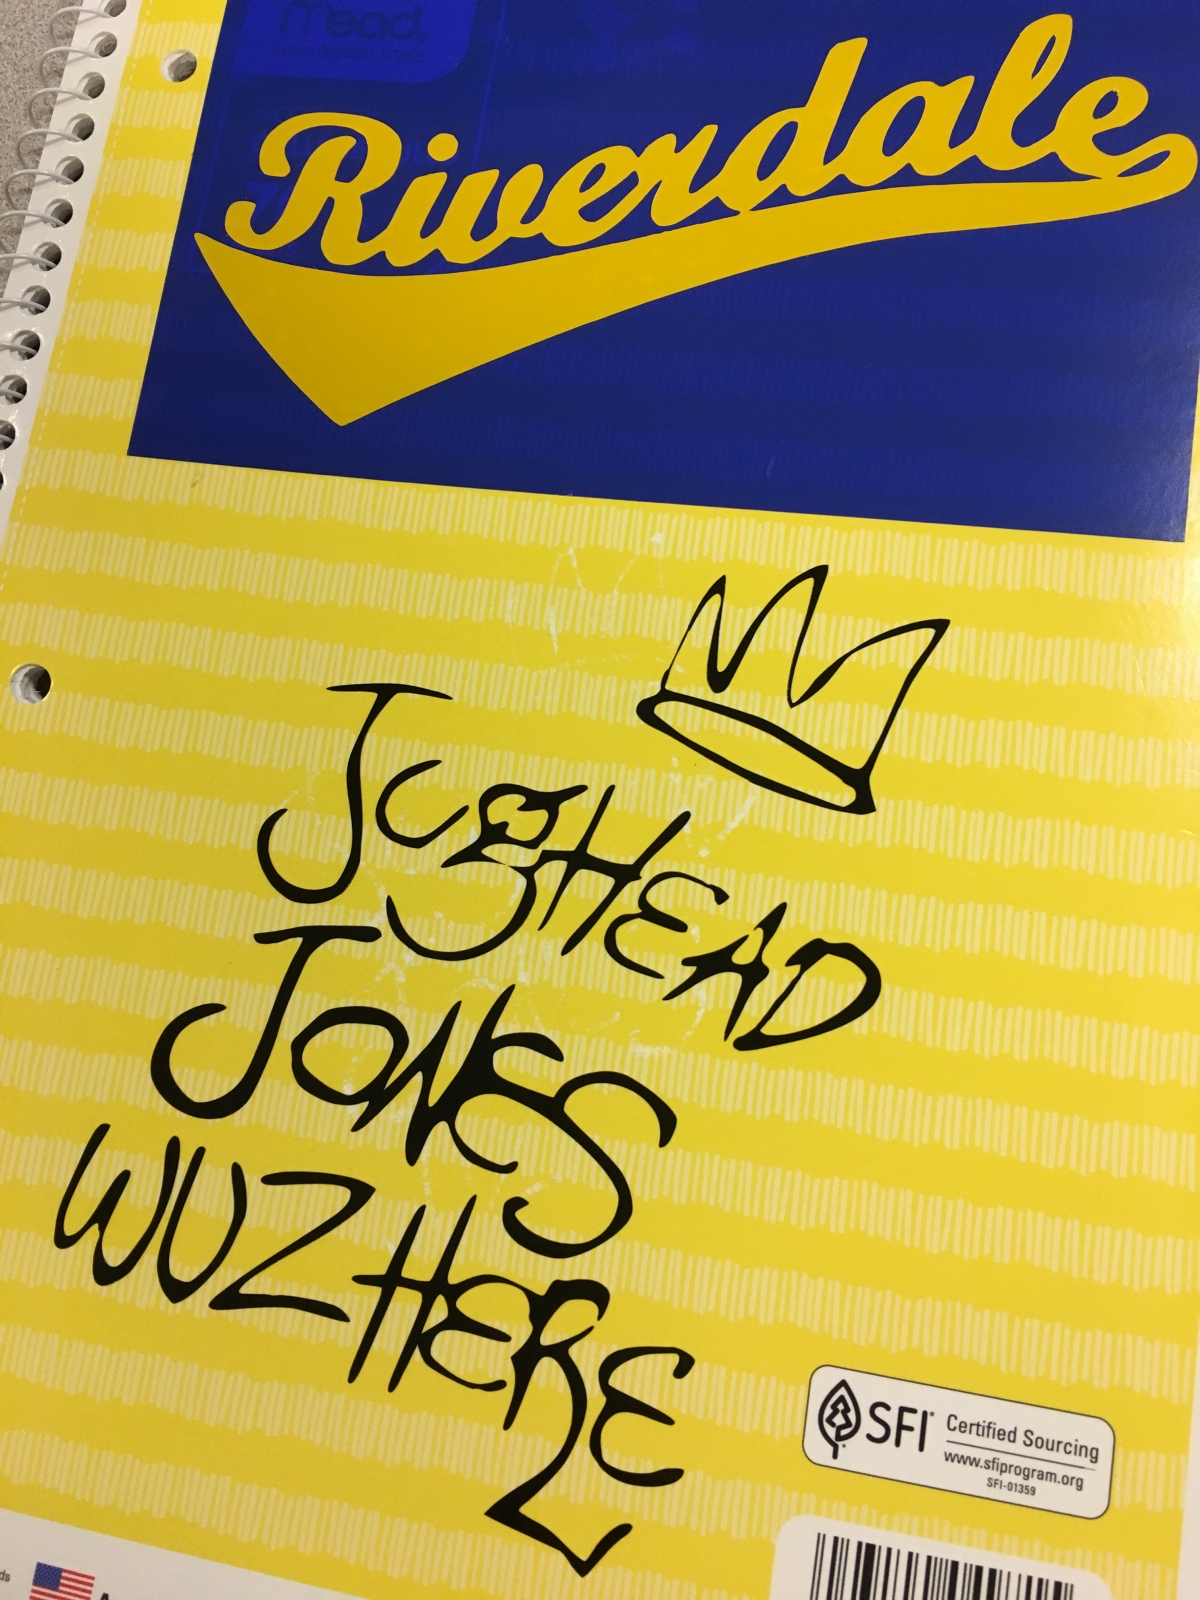 Yellow notebook with Riverdale decal and "Jughead Jones wuz here" decal